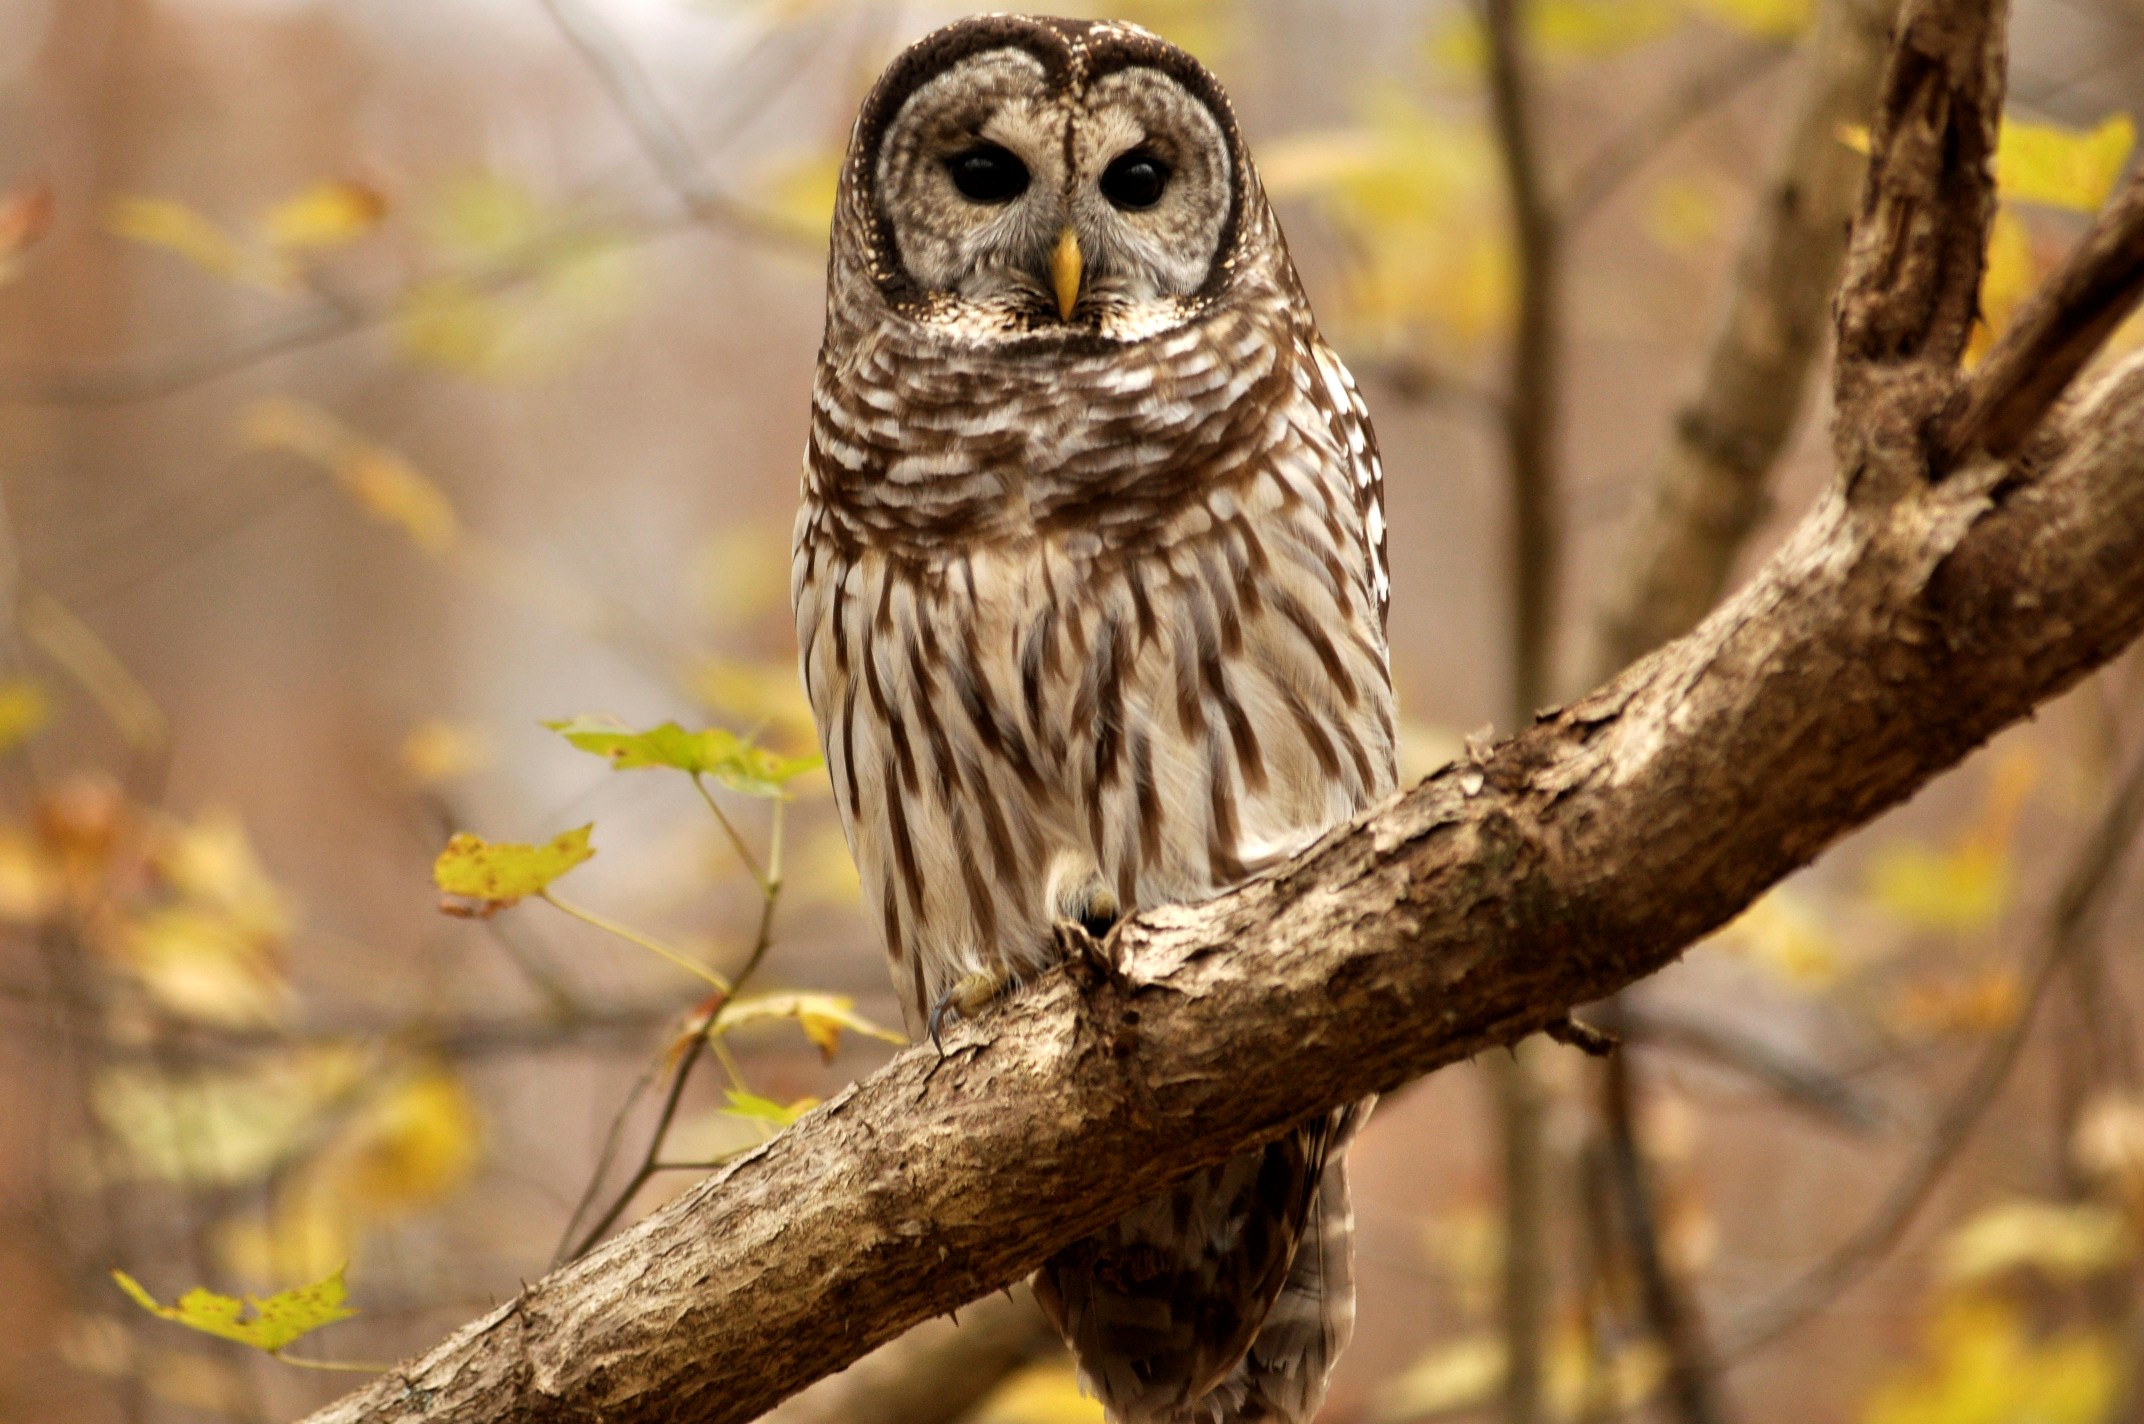 Barred Owl on the branch